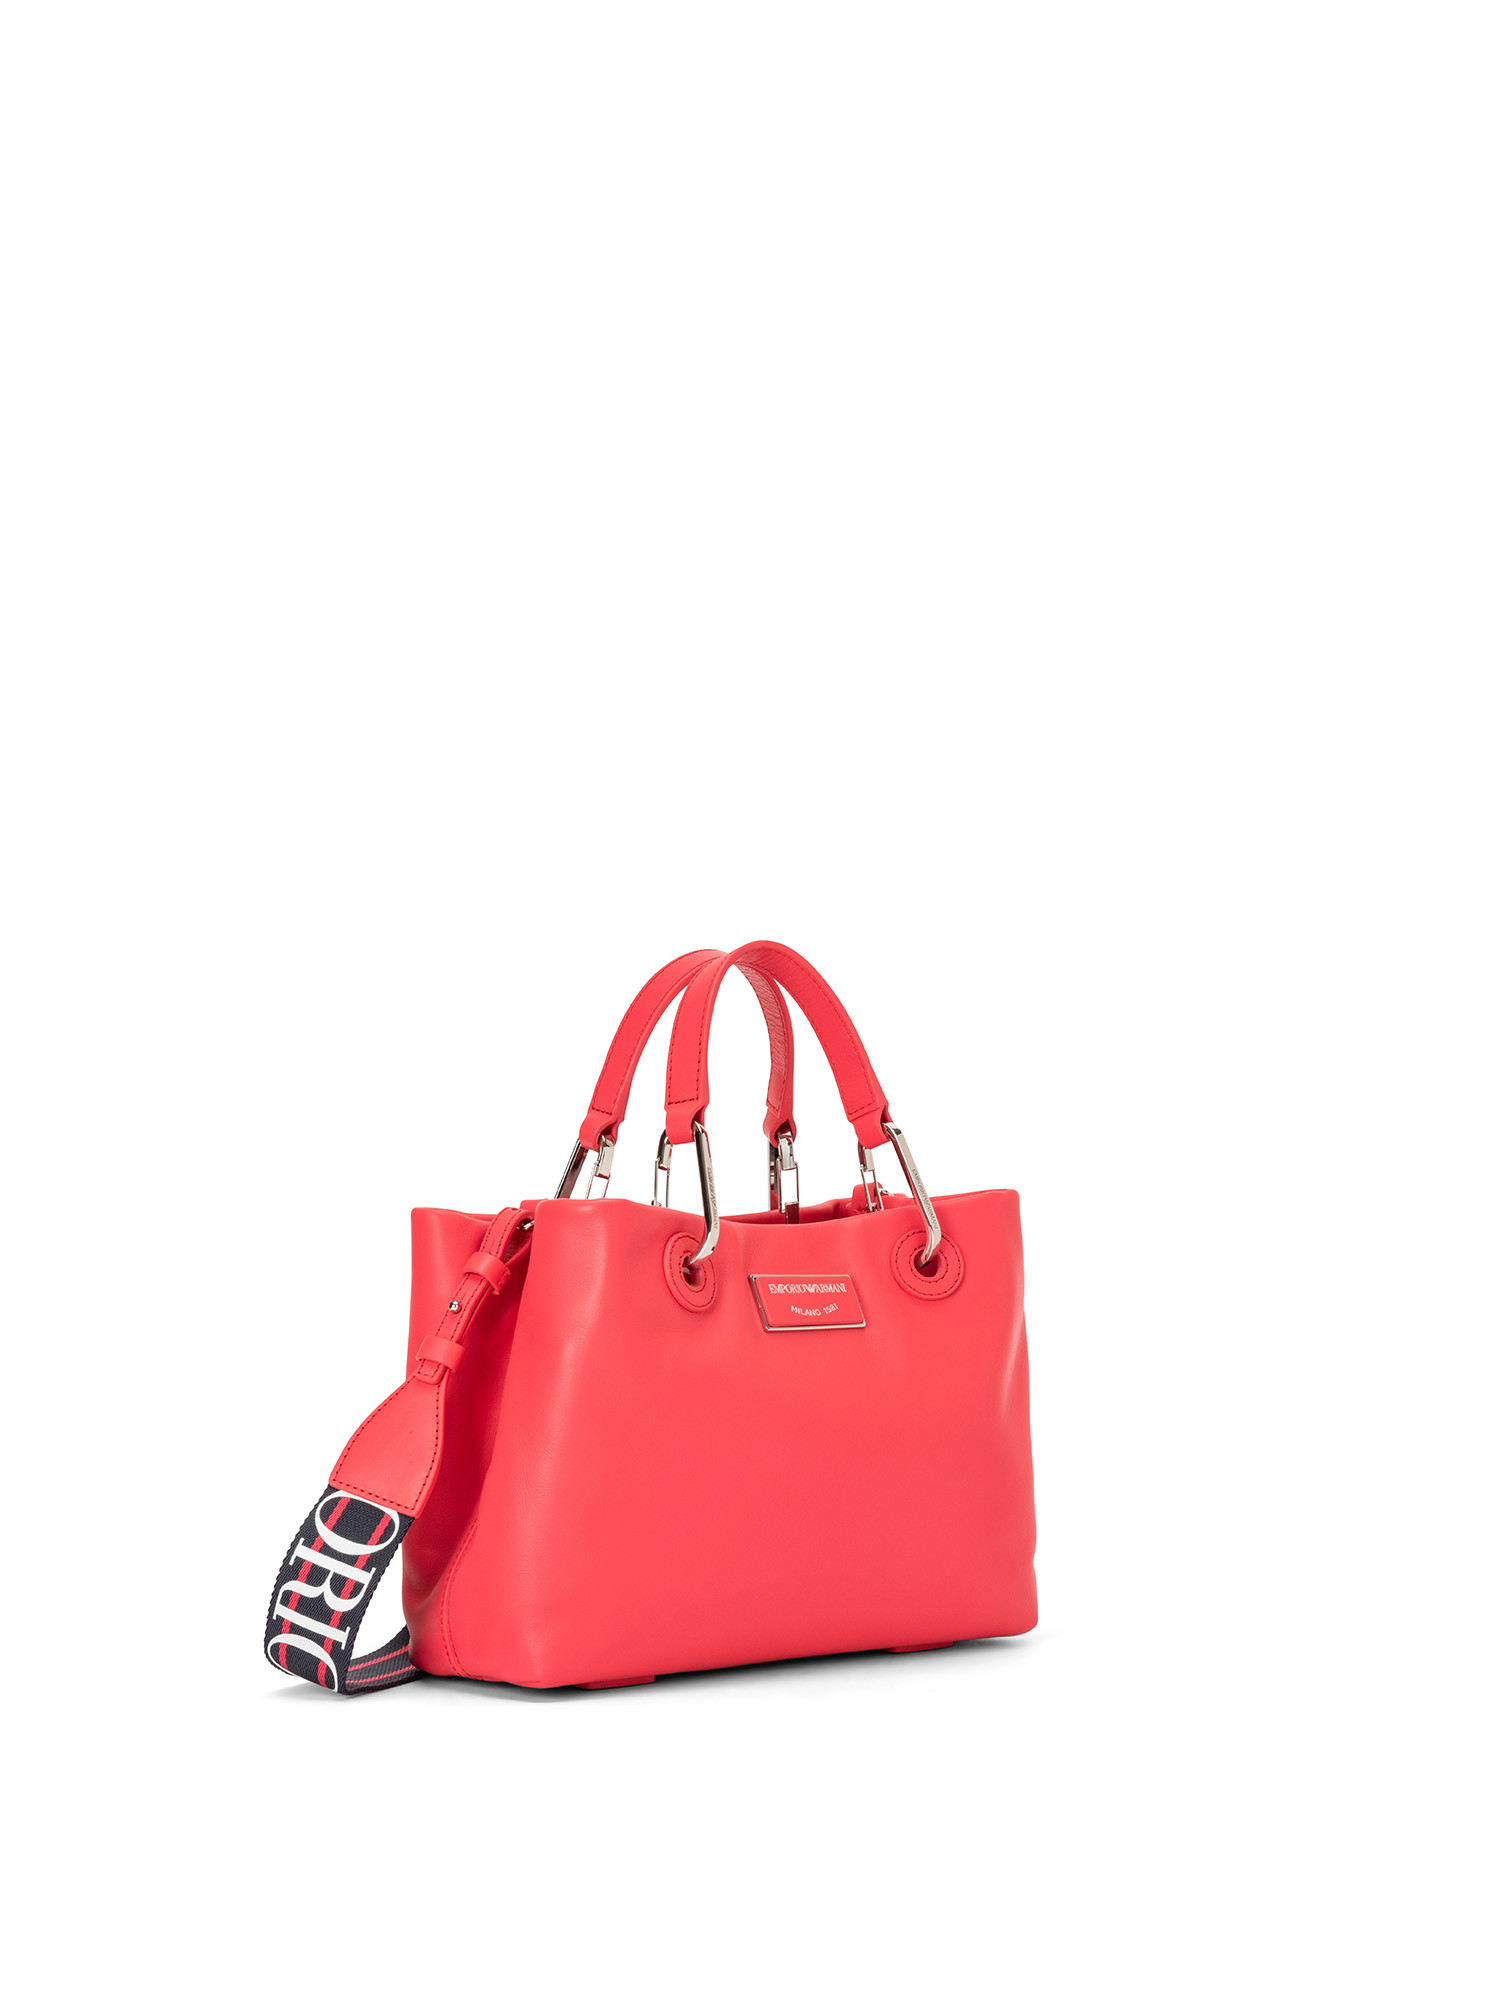 Emporio Armani - Shopper bag in ecological leather, Red, large image number 1